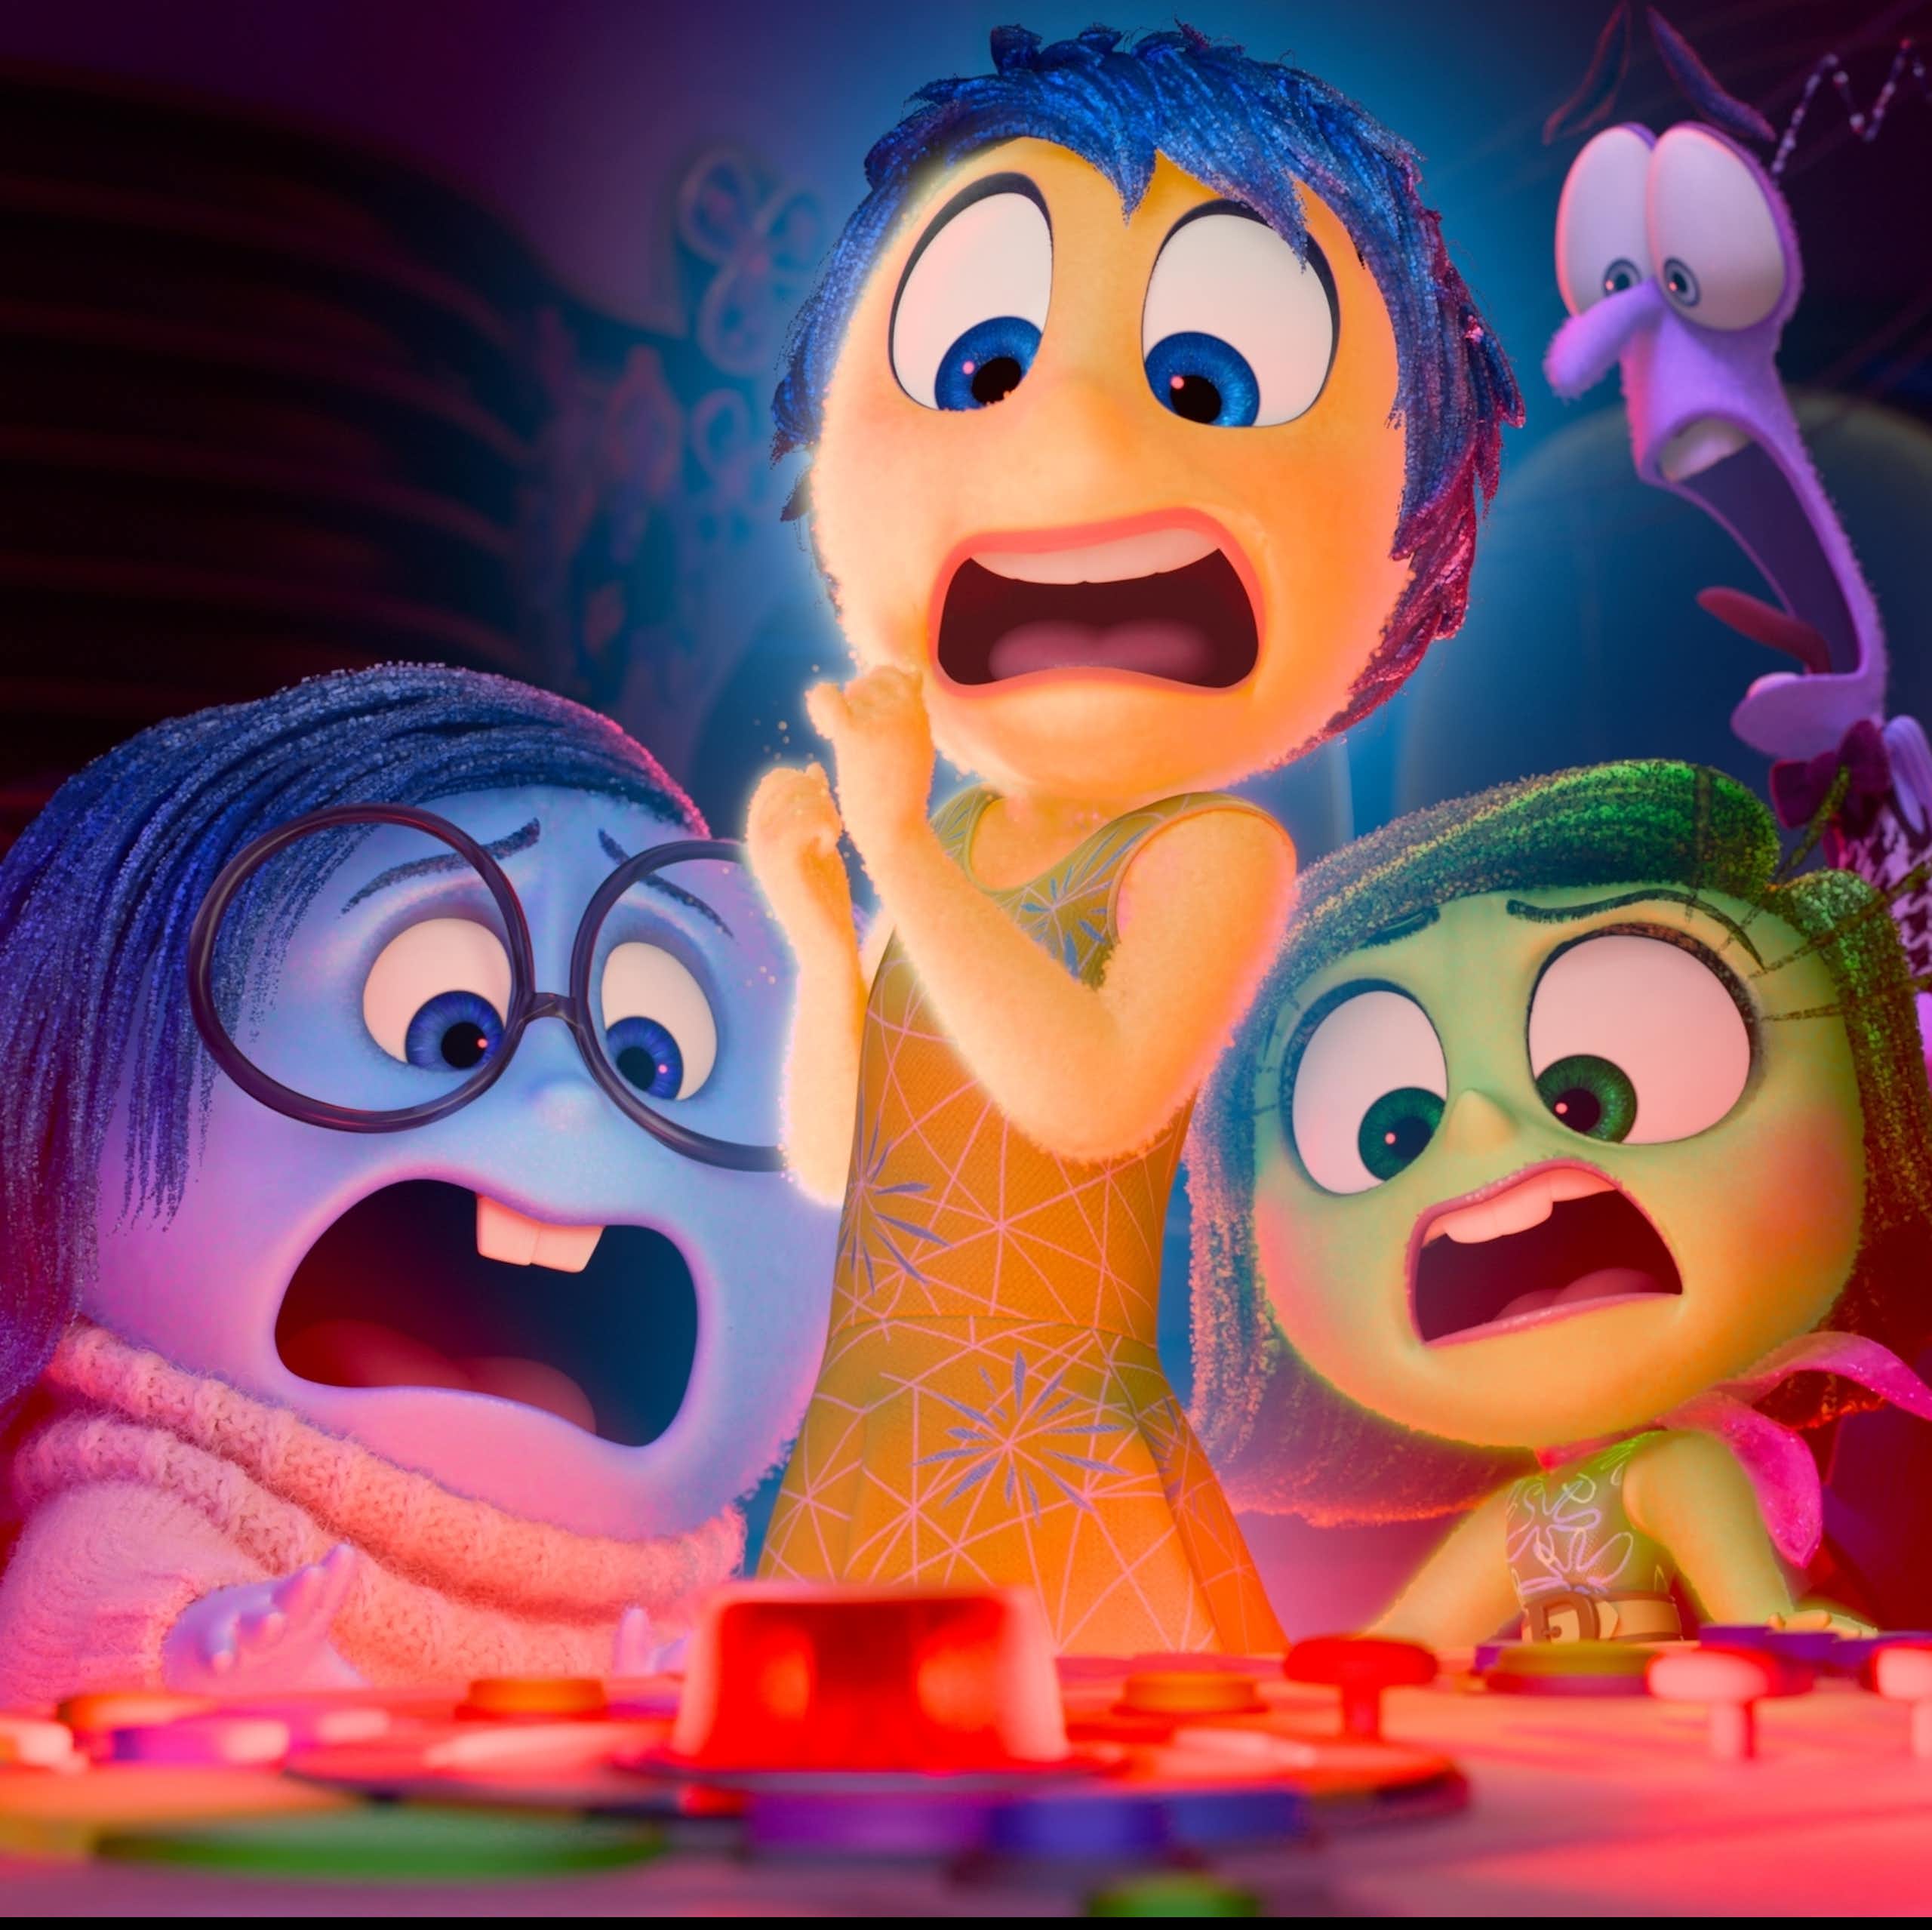 Five animated characters representing different emotions looking alarmed.